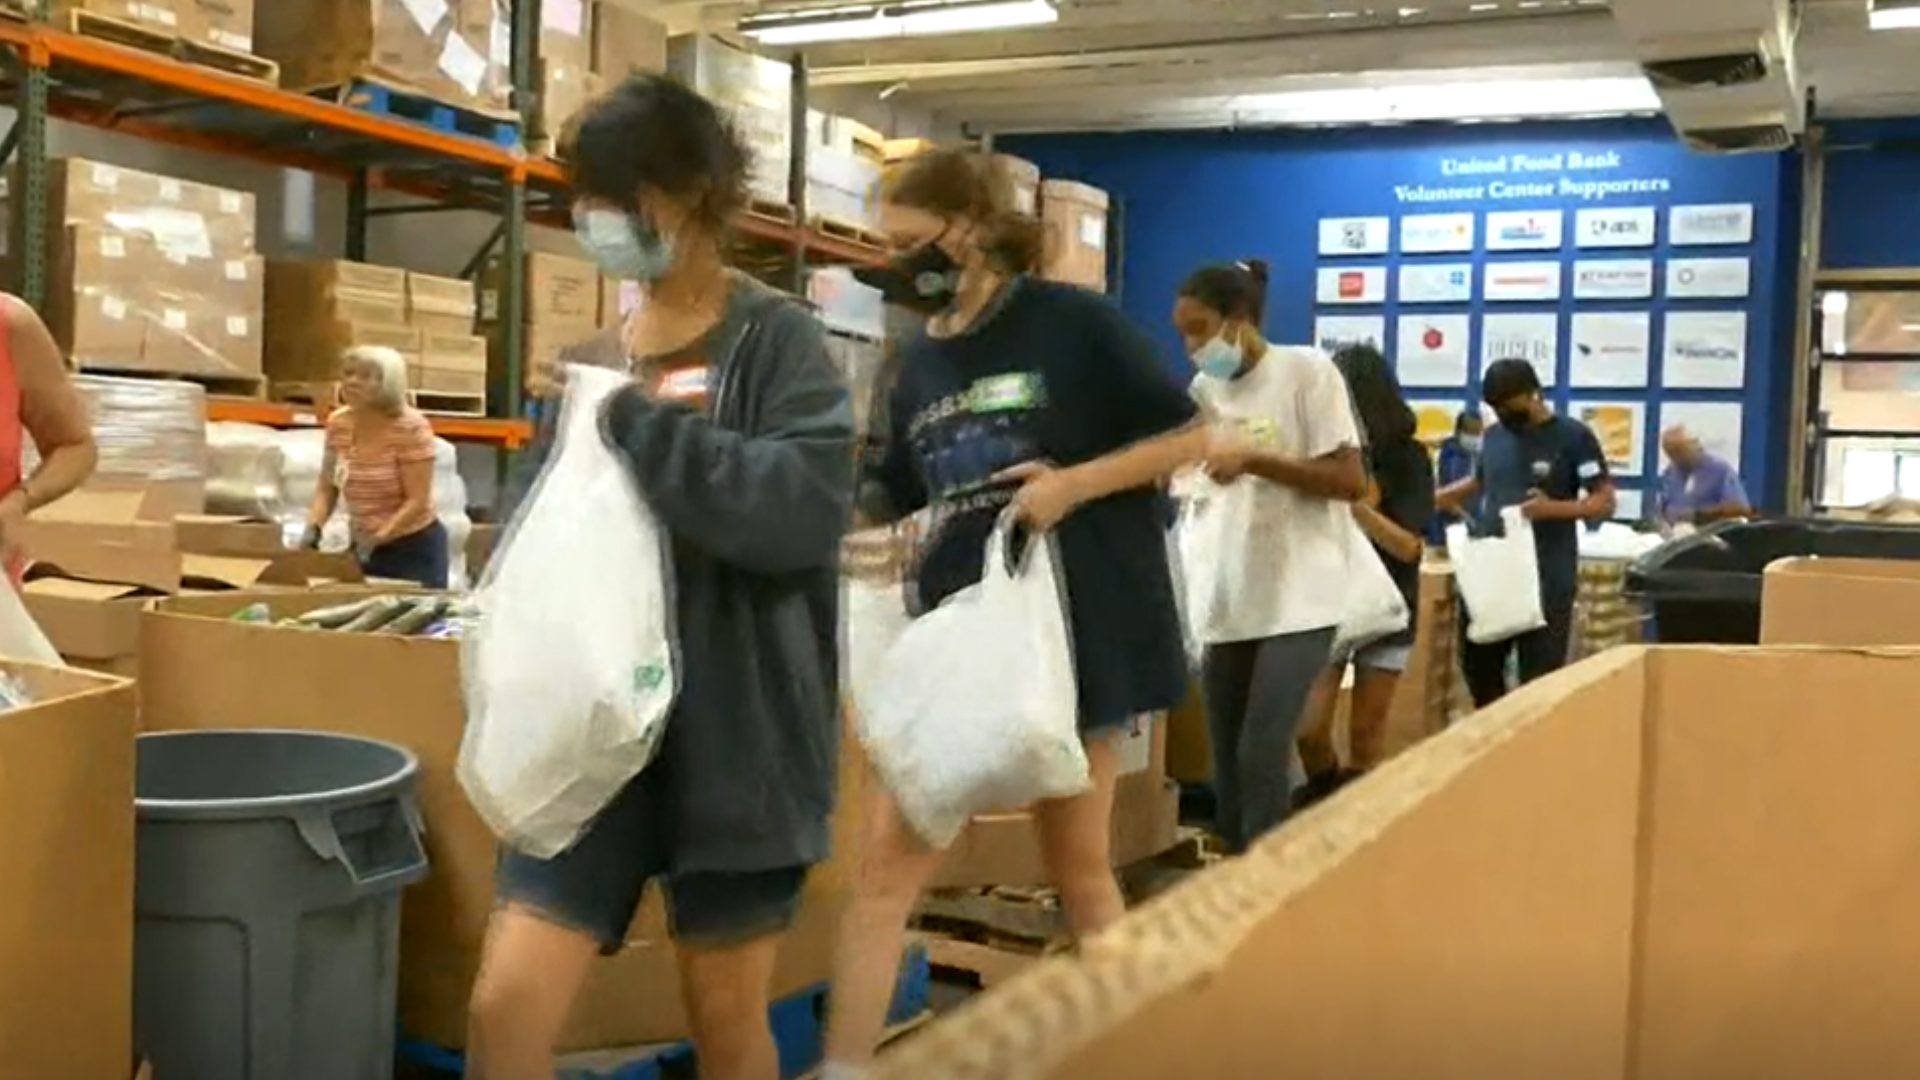 Kids who would usually miss meals during the summer months were fed thanks to the generosity of the 12 News community.